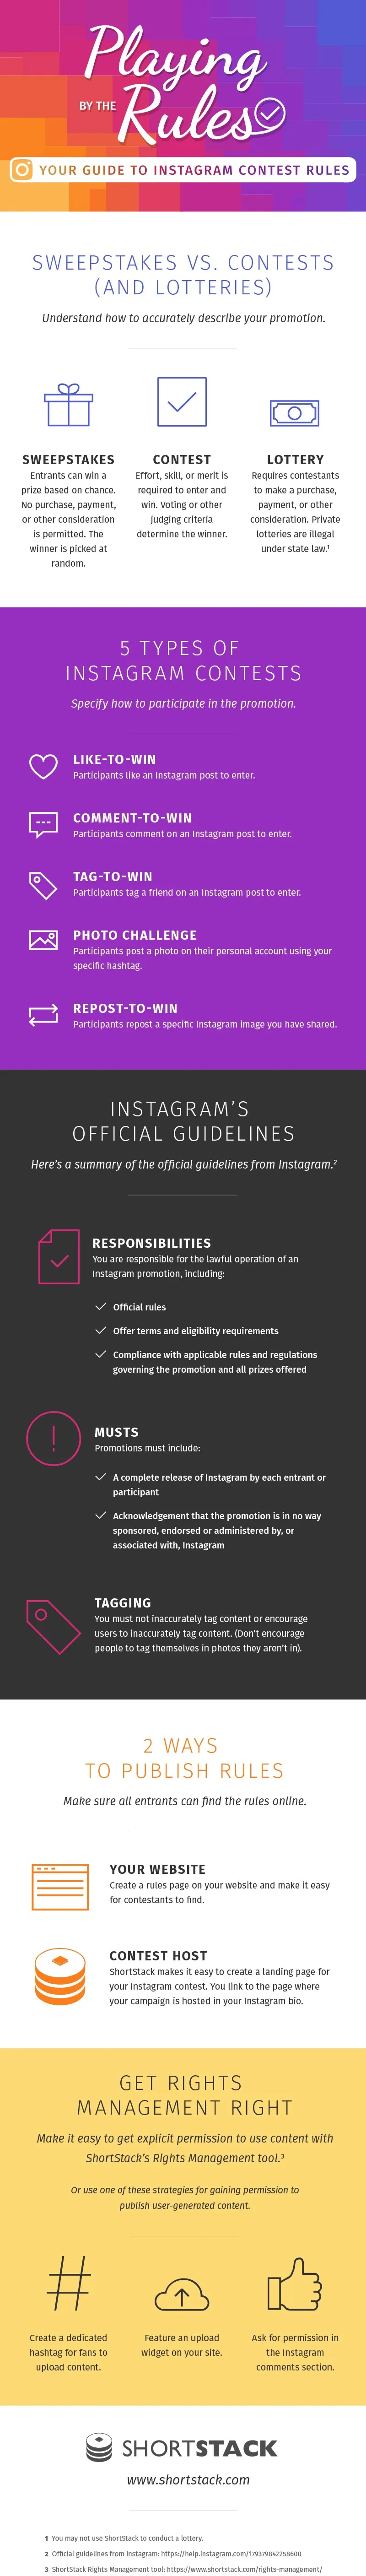 Why Instagram Contests Rule — And How to Play By the Rules - #Infographic